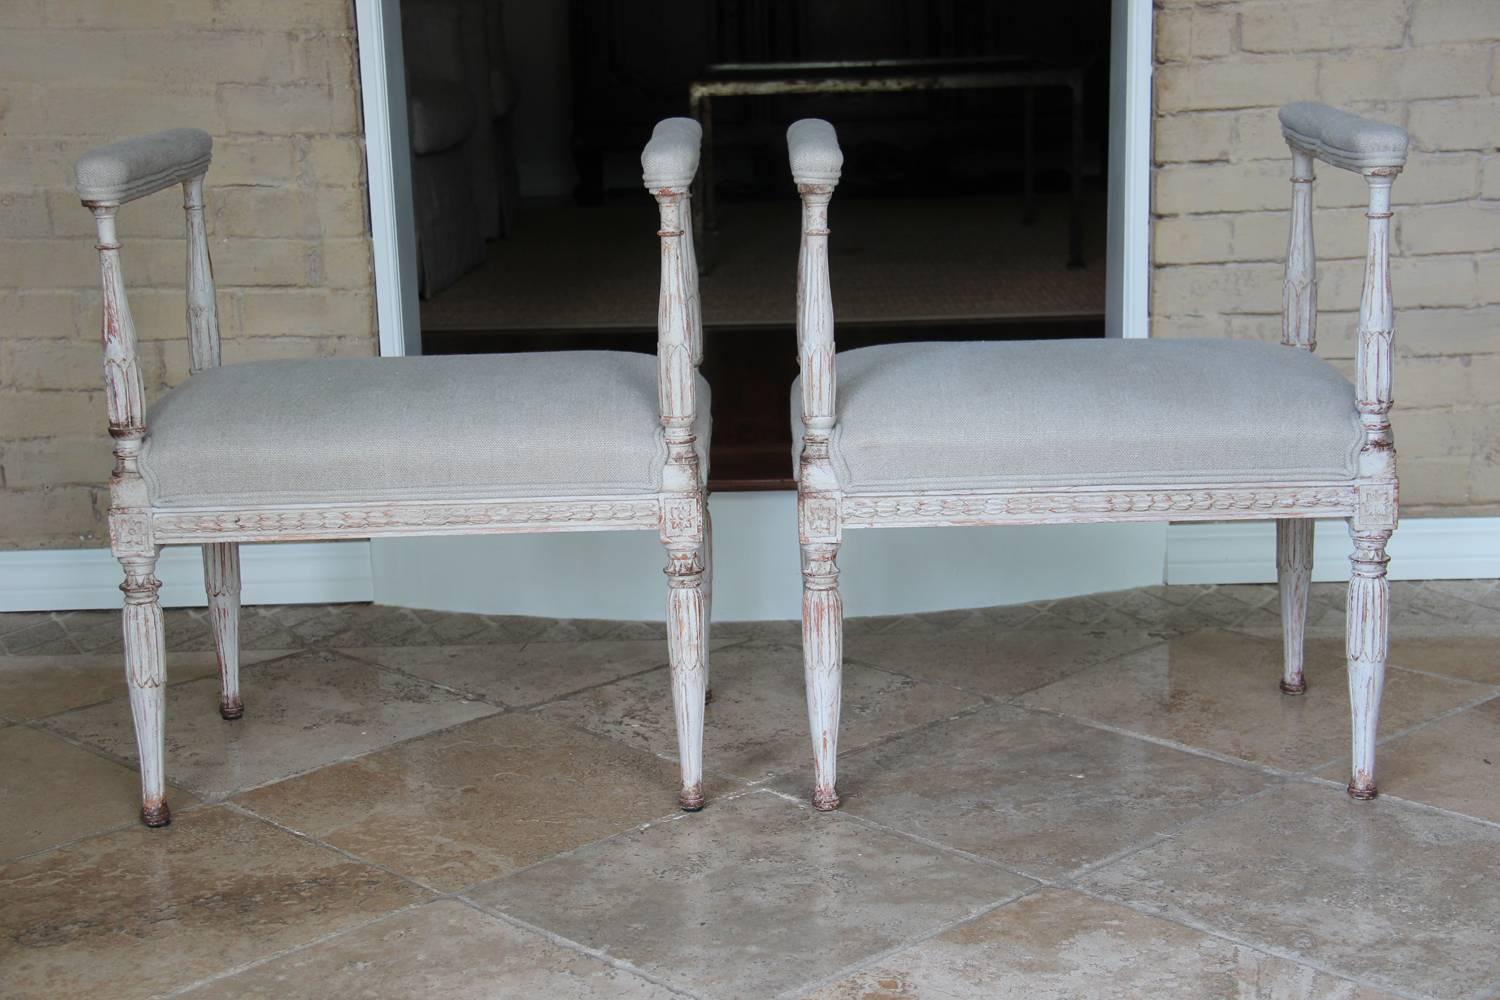 A rare pair of 19th century Swedish Gustavian window seat stools with padded armrests, newly upholstered in Fine de Le Cuona Belgian linen, Urban Linen, color stone. The seat frame features beautifully carved acanthus leaves that are repeated on the